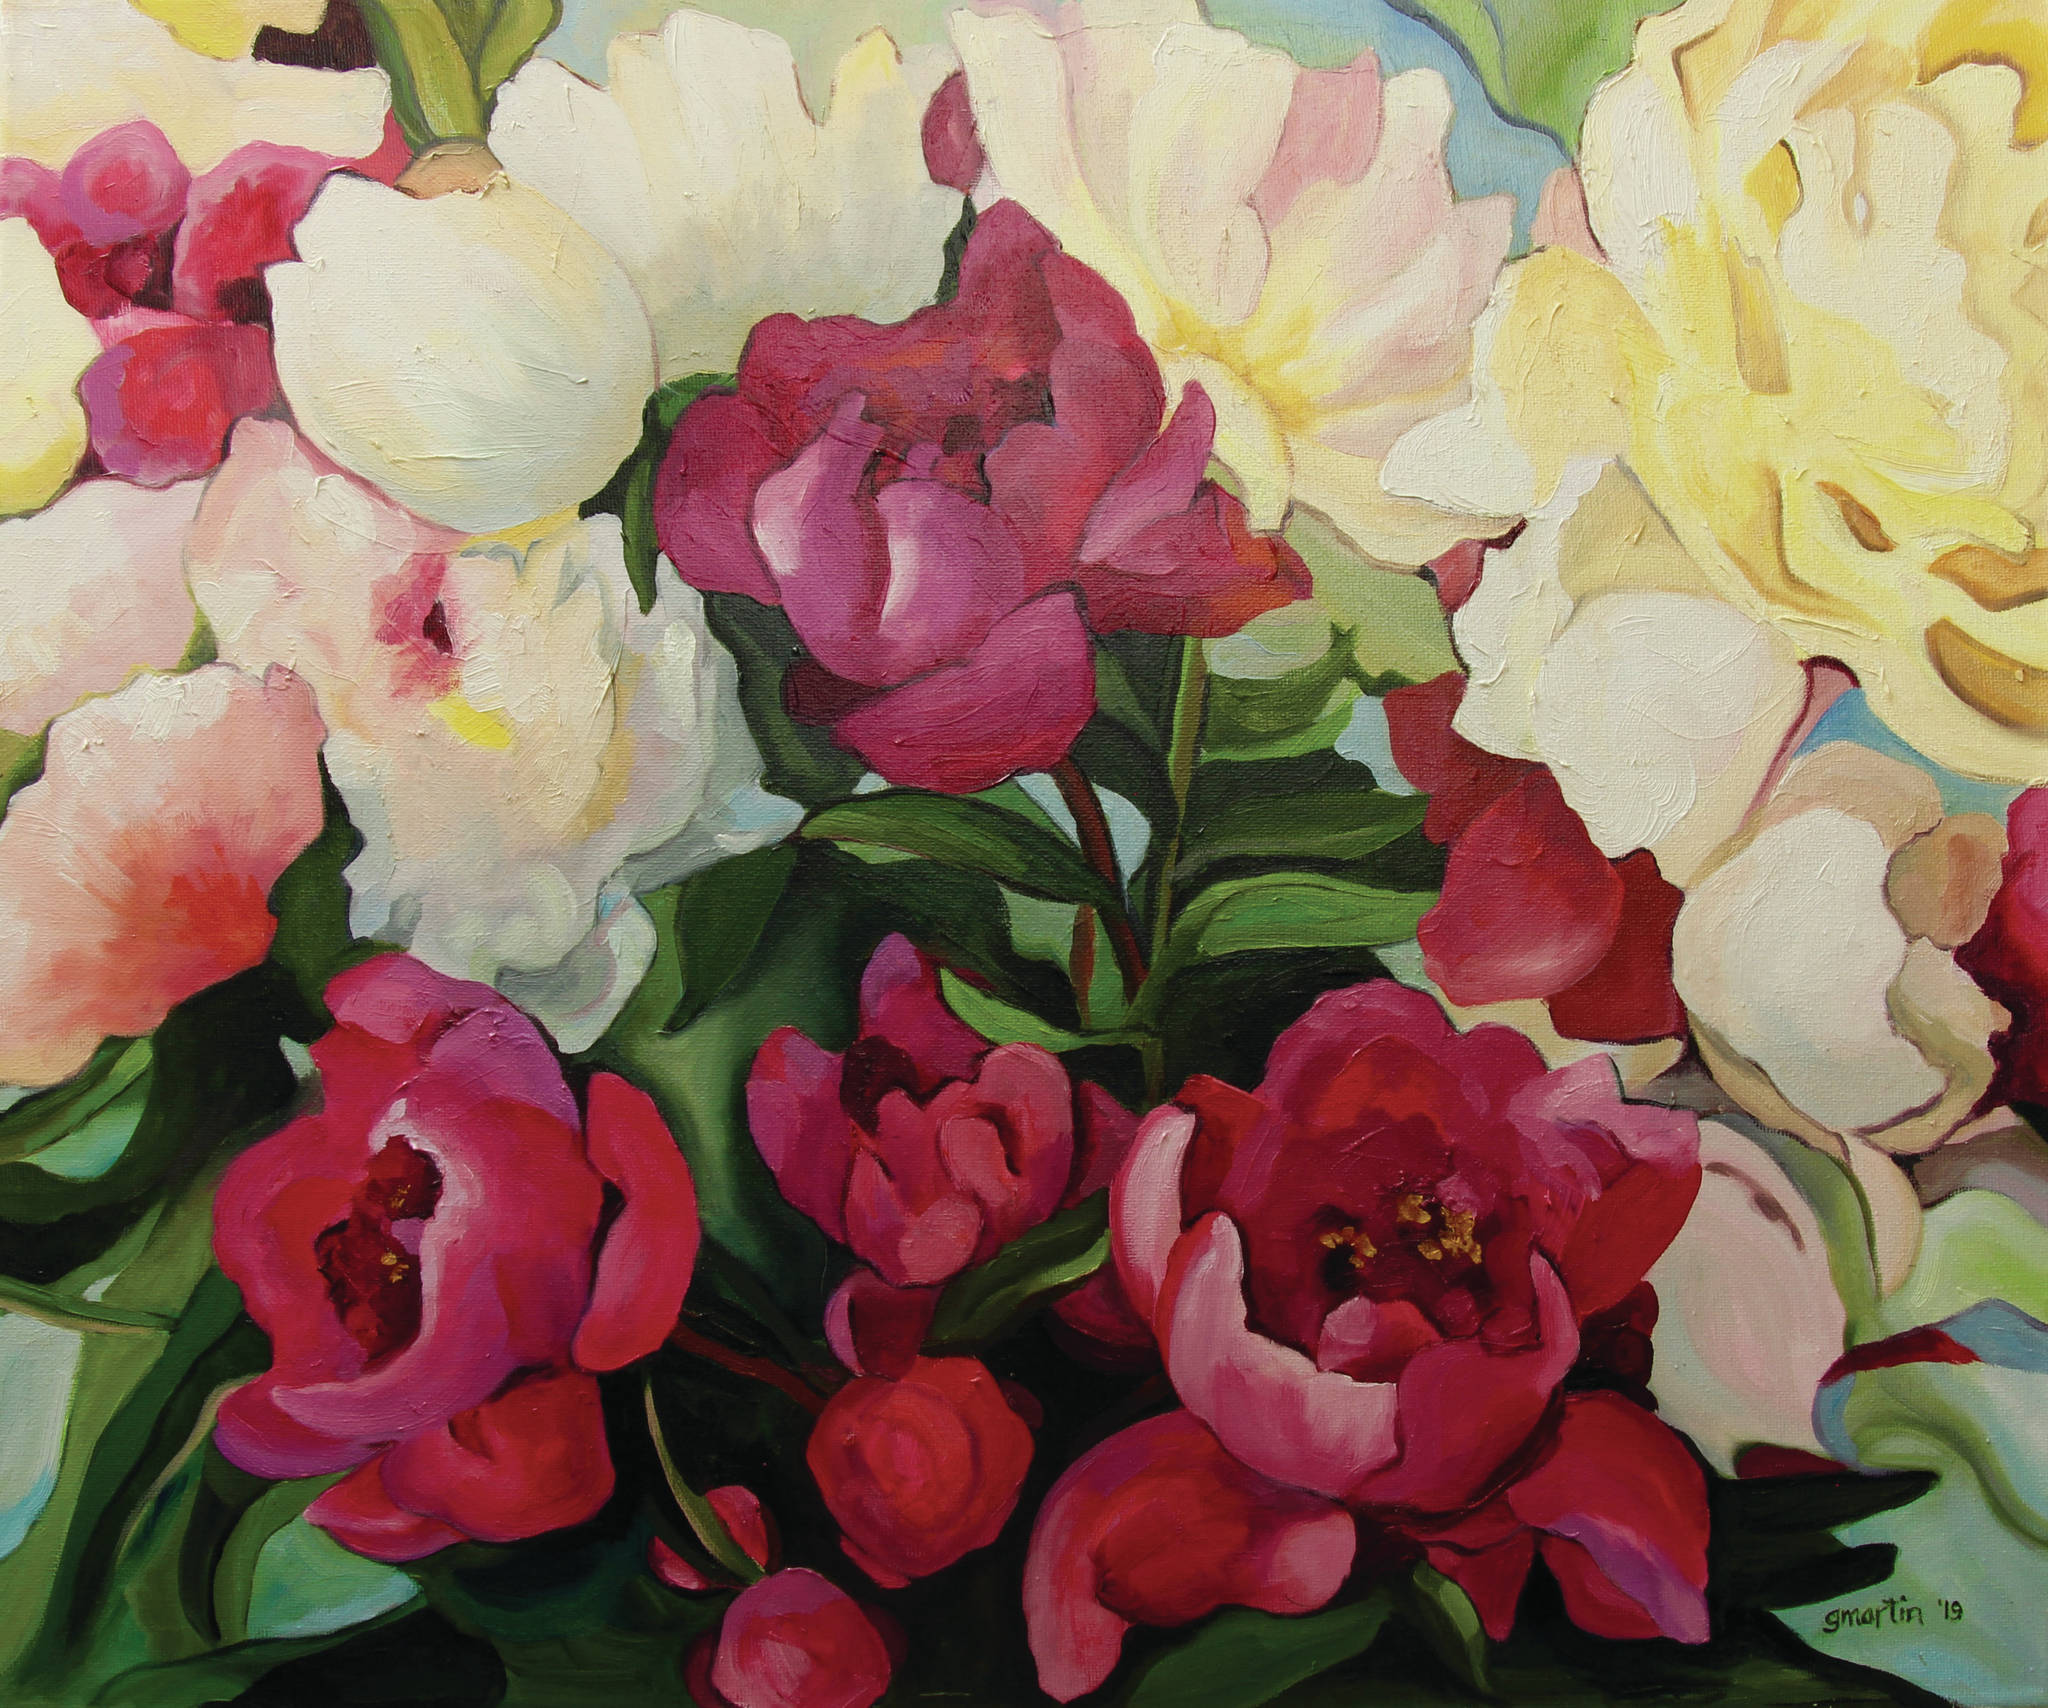 A painting from Gerri Martin's exhibit, "Peonies: Alaska’s Floral Gems,” that opened Friday, July 2, 2021, at Fireweed Gallery in Homer, Alaska. (Photo provided)